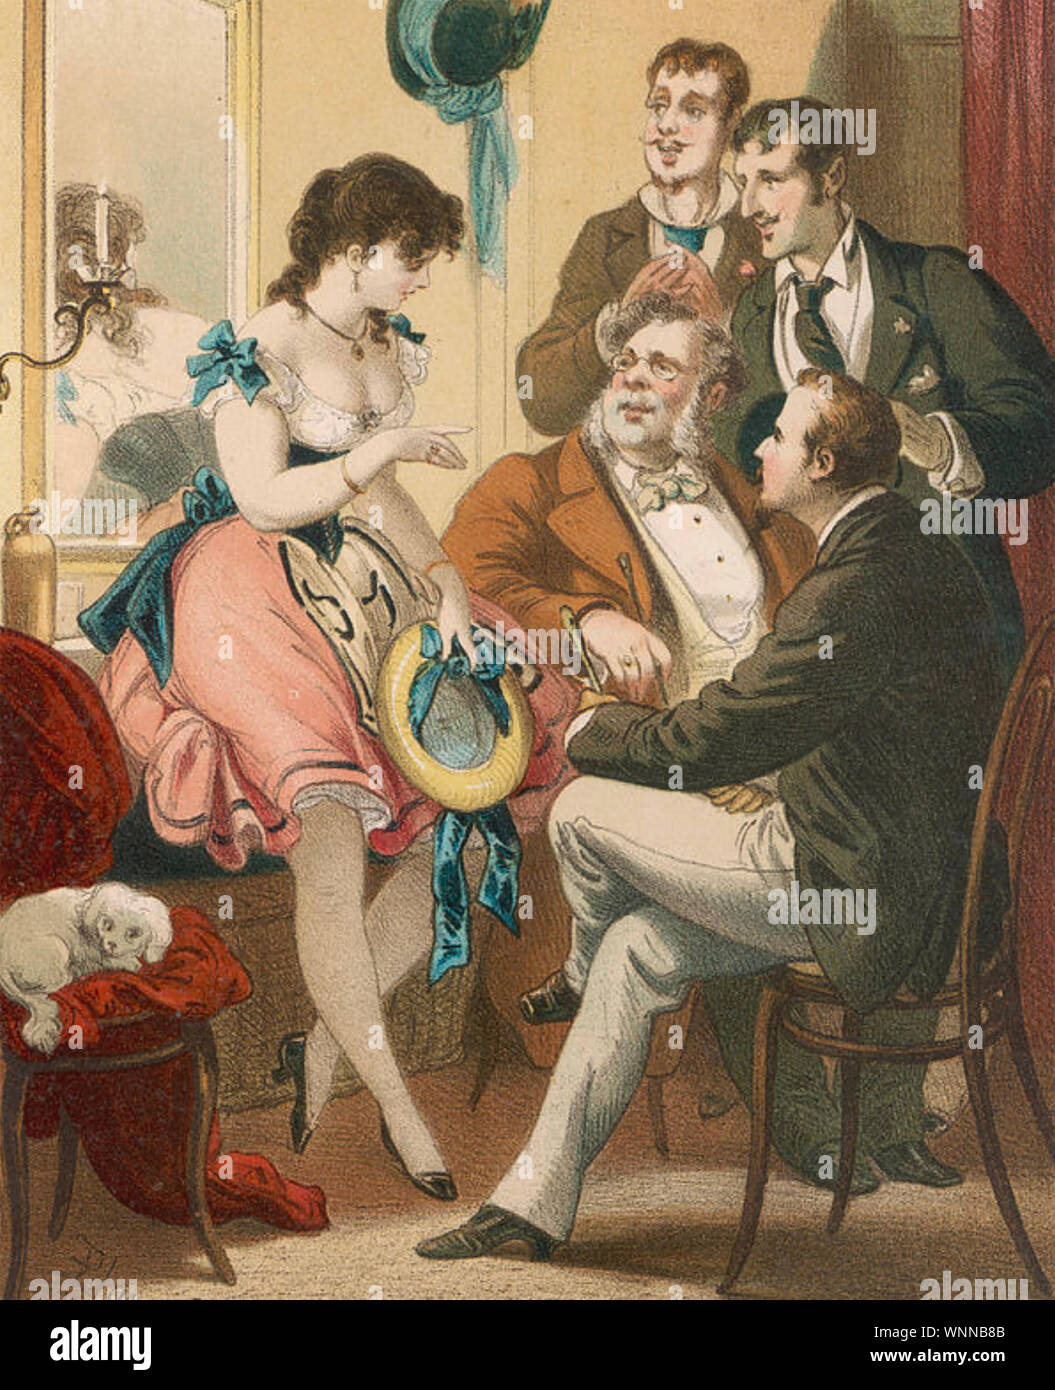 SHOWGIRL WITH ADMIRERS about 1870 Stock Photo